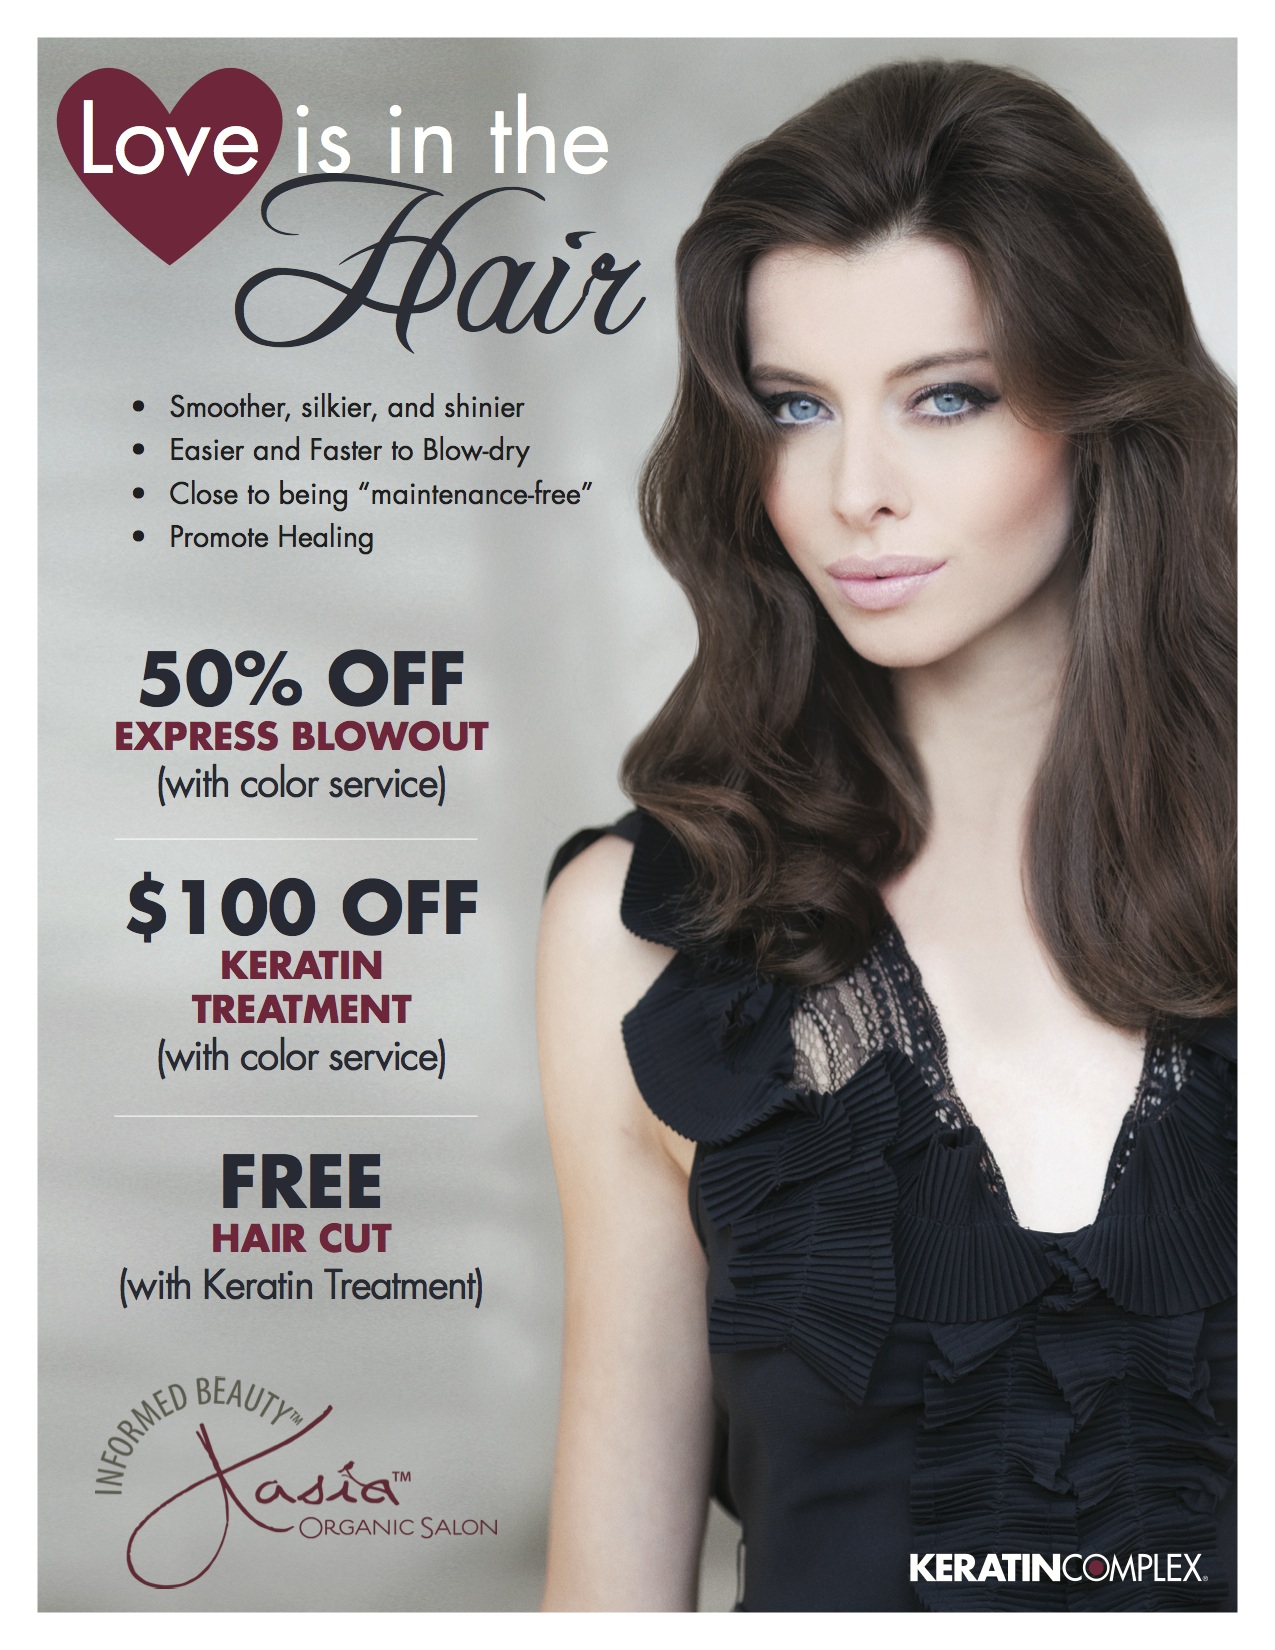 Love is in the Hair! Sexy & Smooth Valentine's Day Keratin Special! —  Beauty Ecology